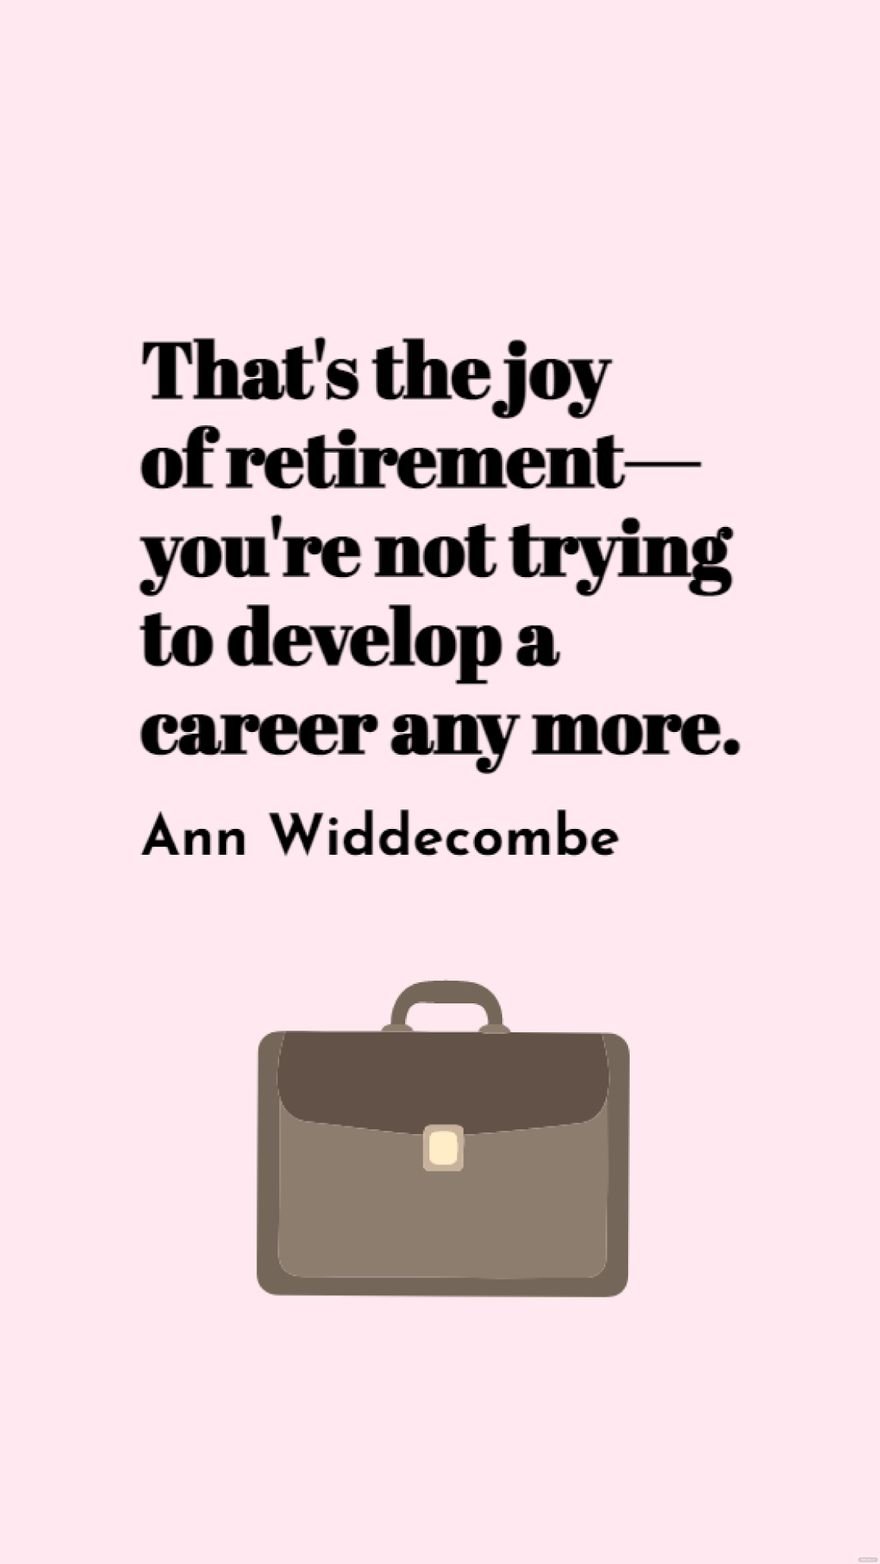 Free Ann Widdecombe - That's the joy of retirement - you're not trying to develop a career any more. in JPG